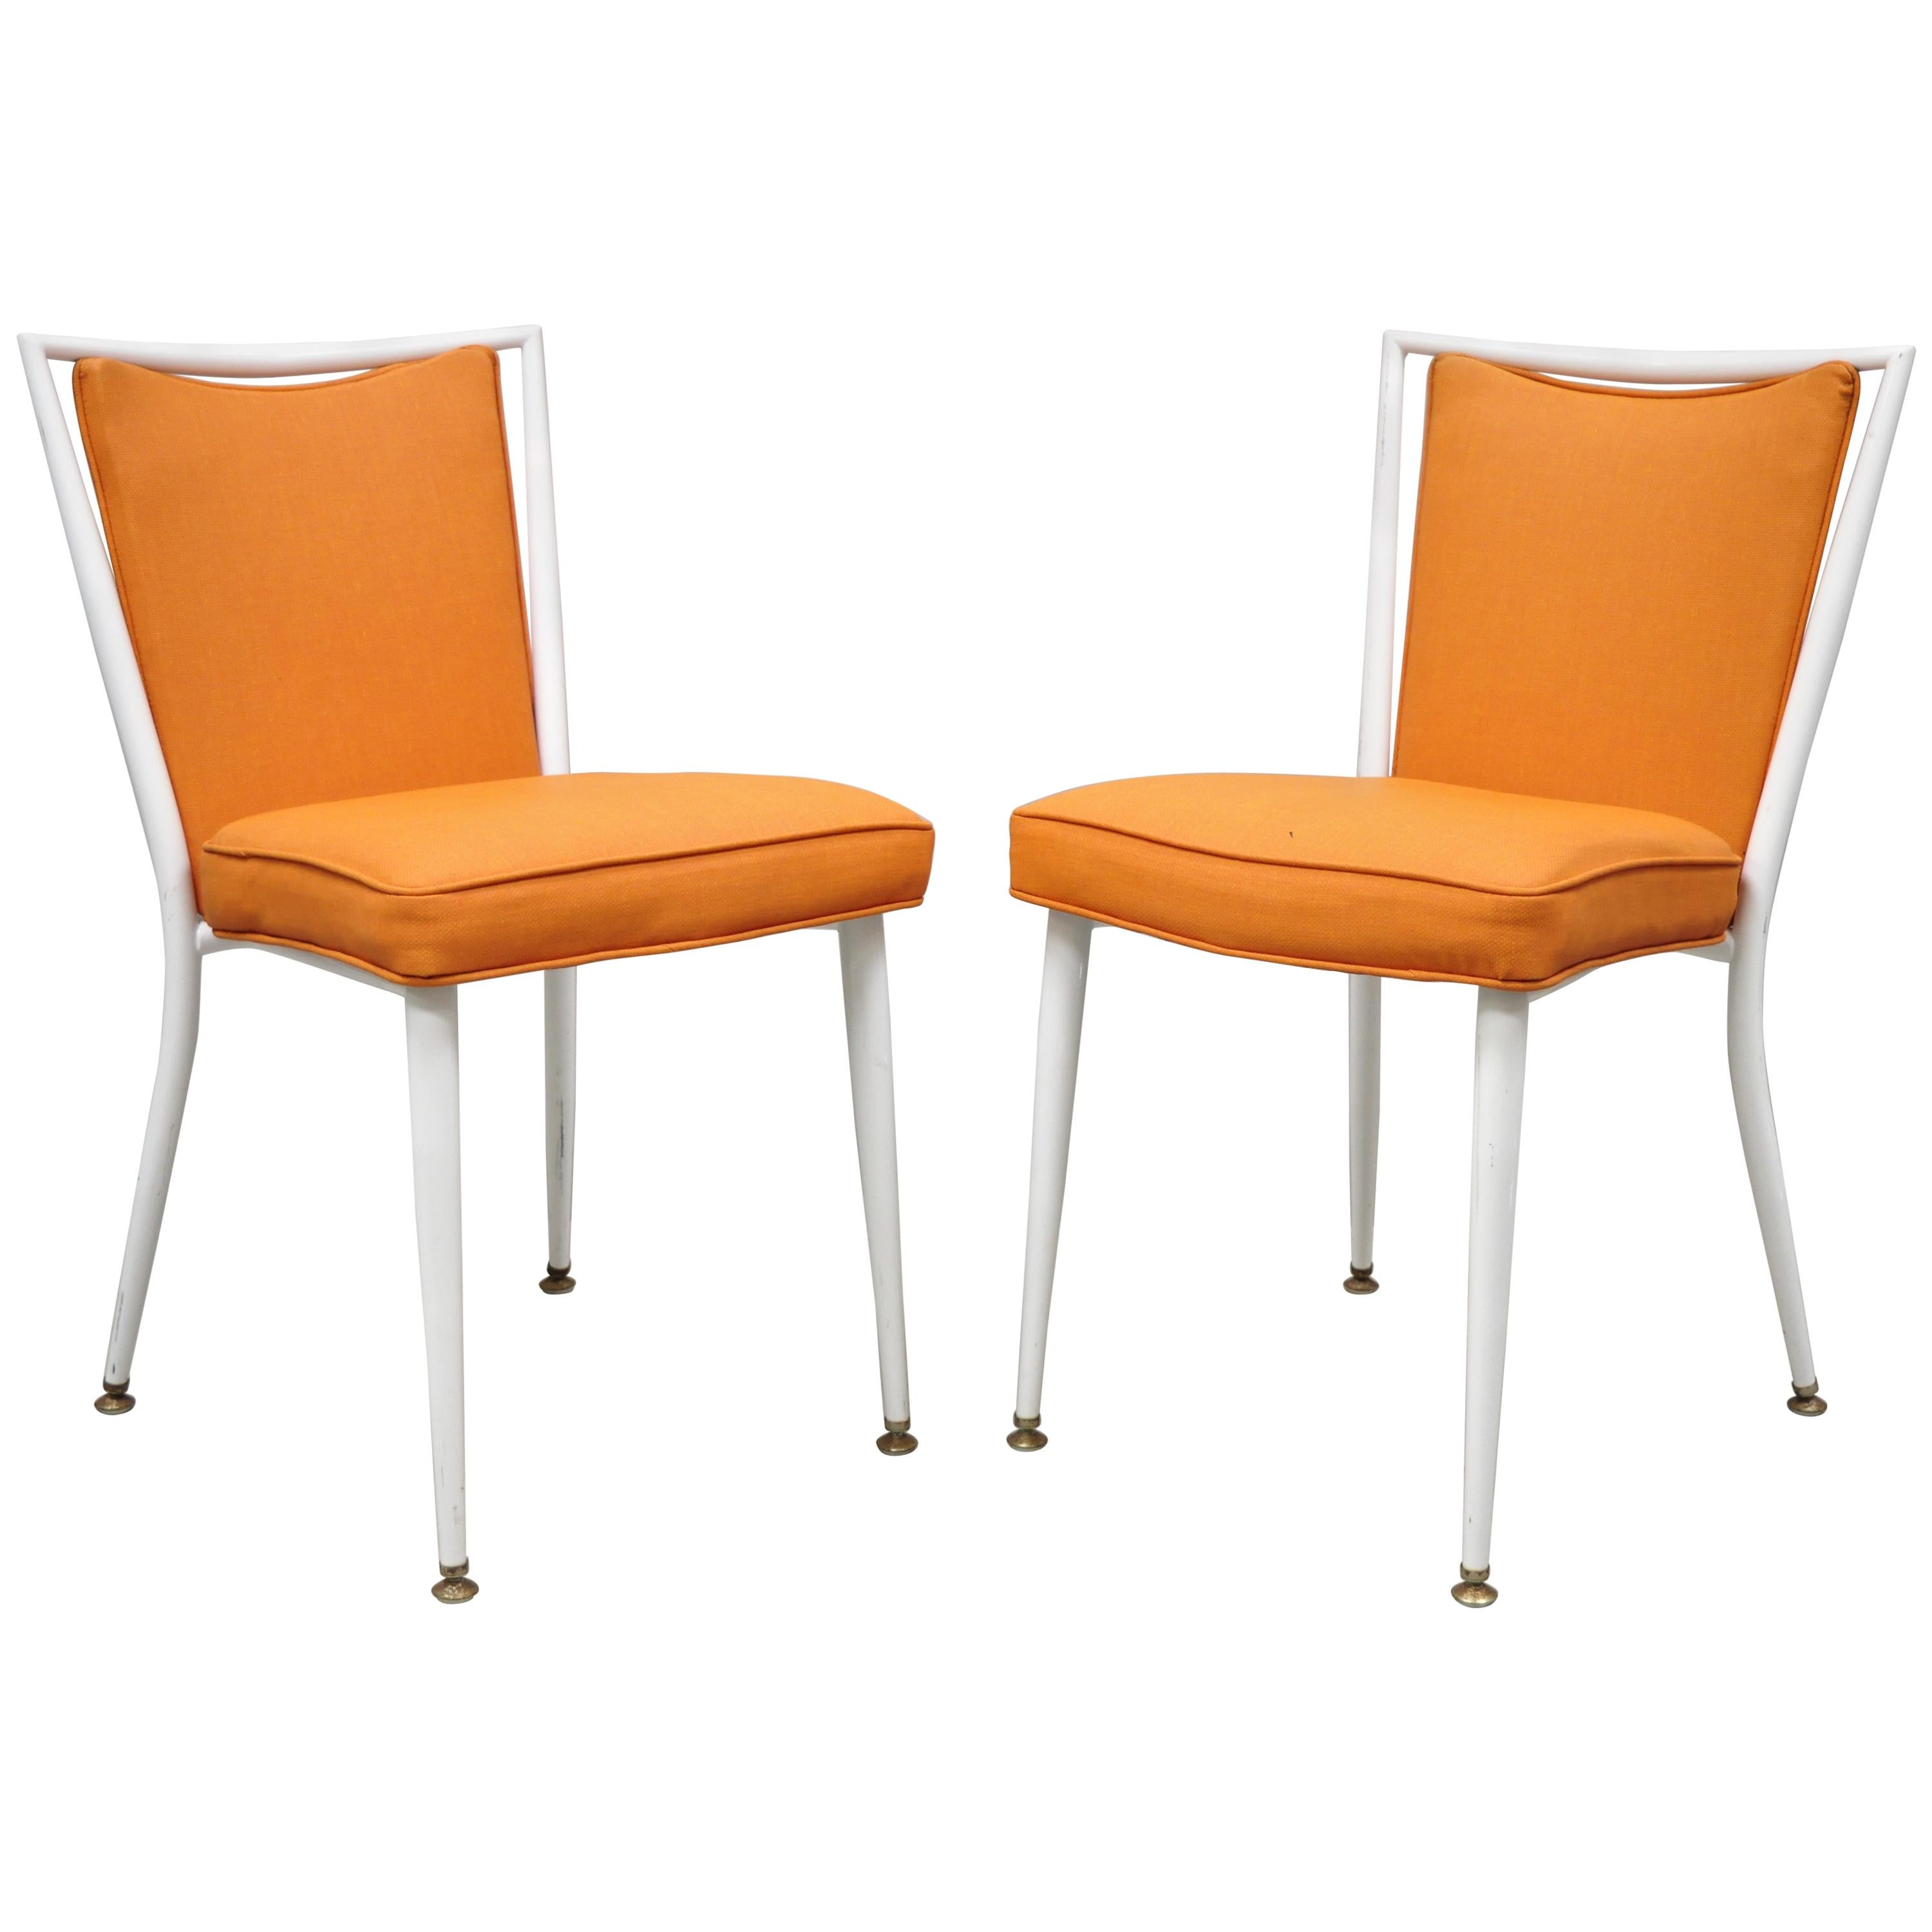 Mid Century White Enameled Steel Metal Orange Fabric Dining Side Chairs, a Pair For Sale